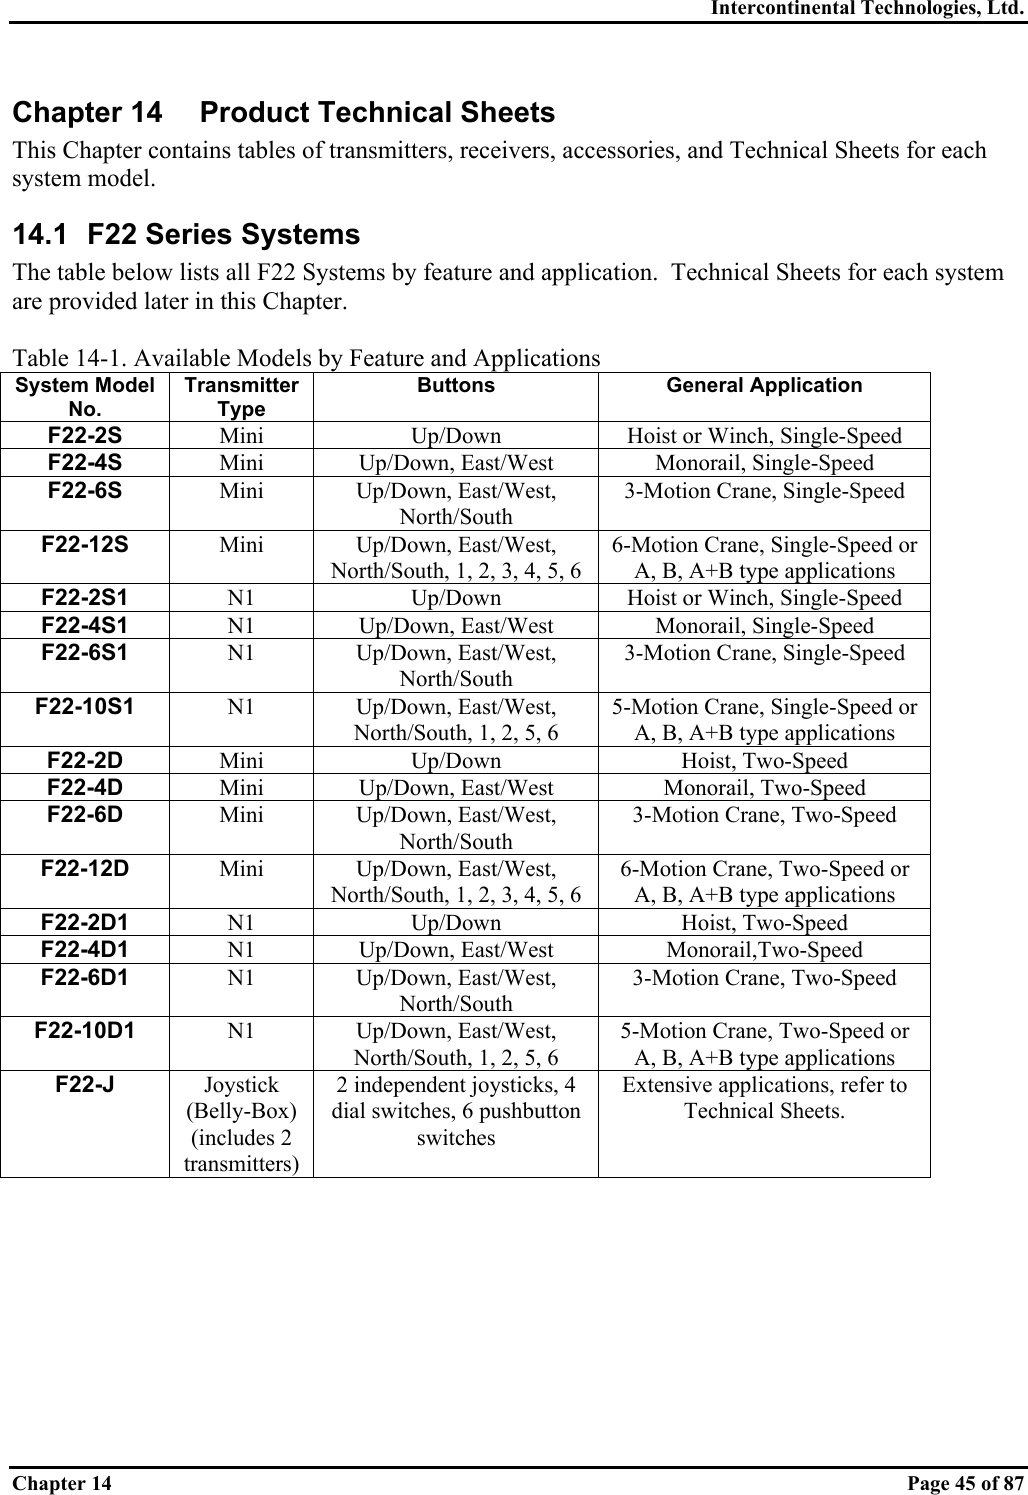 Intercontinental Technologies, Ltd. Chapter 14    Page 45 of 87 Chapter 14  Product Technical Sheets This Chapter contains tables of transmitters, receivers, accessories, and Technical Sheets for each system model. 14.1 F22 Series Systems The table below lists all F22 Systems by feature and application.  Technical Sheets for each system are provided later in this Chapter.  Table 14-1. Available Models by Feature and Applications System Model No. Transmitter Type Buttons General Application F22-2S  Mini  Up/Down  Hoist or Winch, Single-Speed F22-4S  Mini  Up/Down, East/West  Monorail, Single-Speed F22-6S  Mini Up/Down, East/West, North/South 3-Motion Crane, Single-Speed F22-12S  Mini Up/Down, East/West, North/South, 1, 2, 3, 4, 5, 6 6-Motion Crane, Single-Speed or A, B, A+B type applications F22-2S1  N1  Up/Down  Hoist or Winch, Single-Speed F22-4S1  N1  Up/Down, East/West  Monorail, Single-Speed F22-6S1  N1 Up/Down, East/West, North/South 3-Motion Crane, Single-Speed F22-10S1  N1 Up/Down, East/West, North/South, 1, 2, 5, 6 5-Motion Crane, Single-Speed or A, B, A+B type applications F22-2D  Mini Up/Down  Hoist, Two-Speed F22-4D  Mini  Up/Down, East/West  Monorail, Two-Speed F22-6D  Mini Up/Down, East/West, North/South 3-Motion Crane, Two-Speed F22-12D  Mini Up/Down, East/West, North/South, 1, 2, 3, 4, 5, 6 6-Motion Crane, Two-Speed or A, B, A+B type applications F22-2D1  N1 Up/Down  Hoist, Two-Speed F22-4D1  N1 Up/Down, East/West  Monorail,Two-Speed F22-6D1  N1 Up/Down, East/West, North/South 3-Motion Crane, Two-Speed F22-10D1  N1 Up/Down, East/West, North/South, 1, 2, 5, 6 5-Motion Crane, Two-Speed or A, B, A+B type applications F22-J  Joystick (Belly-Box) (includes 2 transmitters) 2 independent joysticks, 4 dial switches, 6 pushbutton switches Extensive applications, refer to Technical Sheets.  